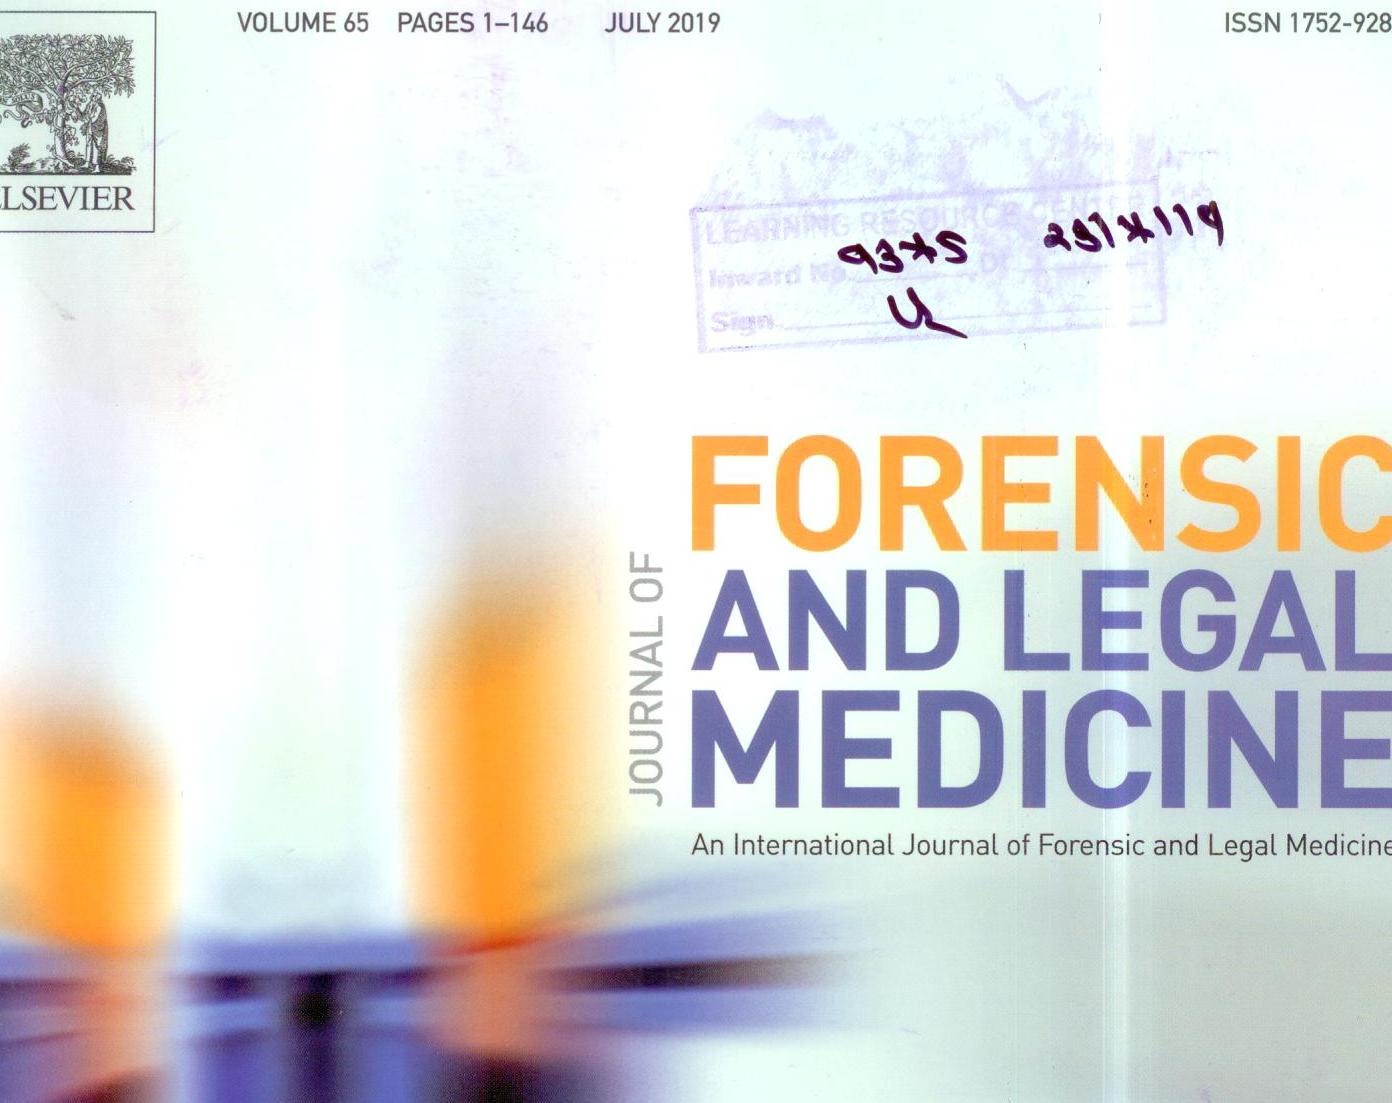 https://www.sciencedirect.com/journal/journal-of-forensic-and-legal-medicine/vol/65/suppl/C